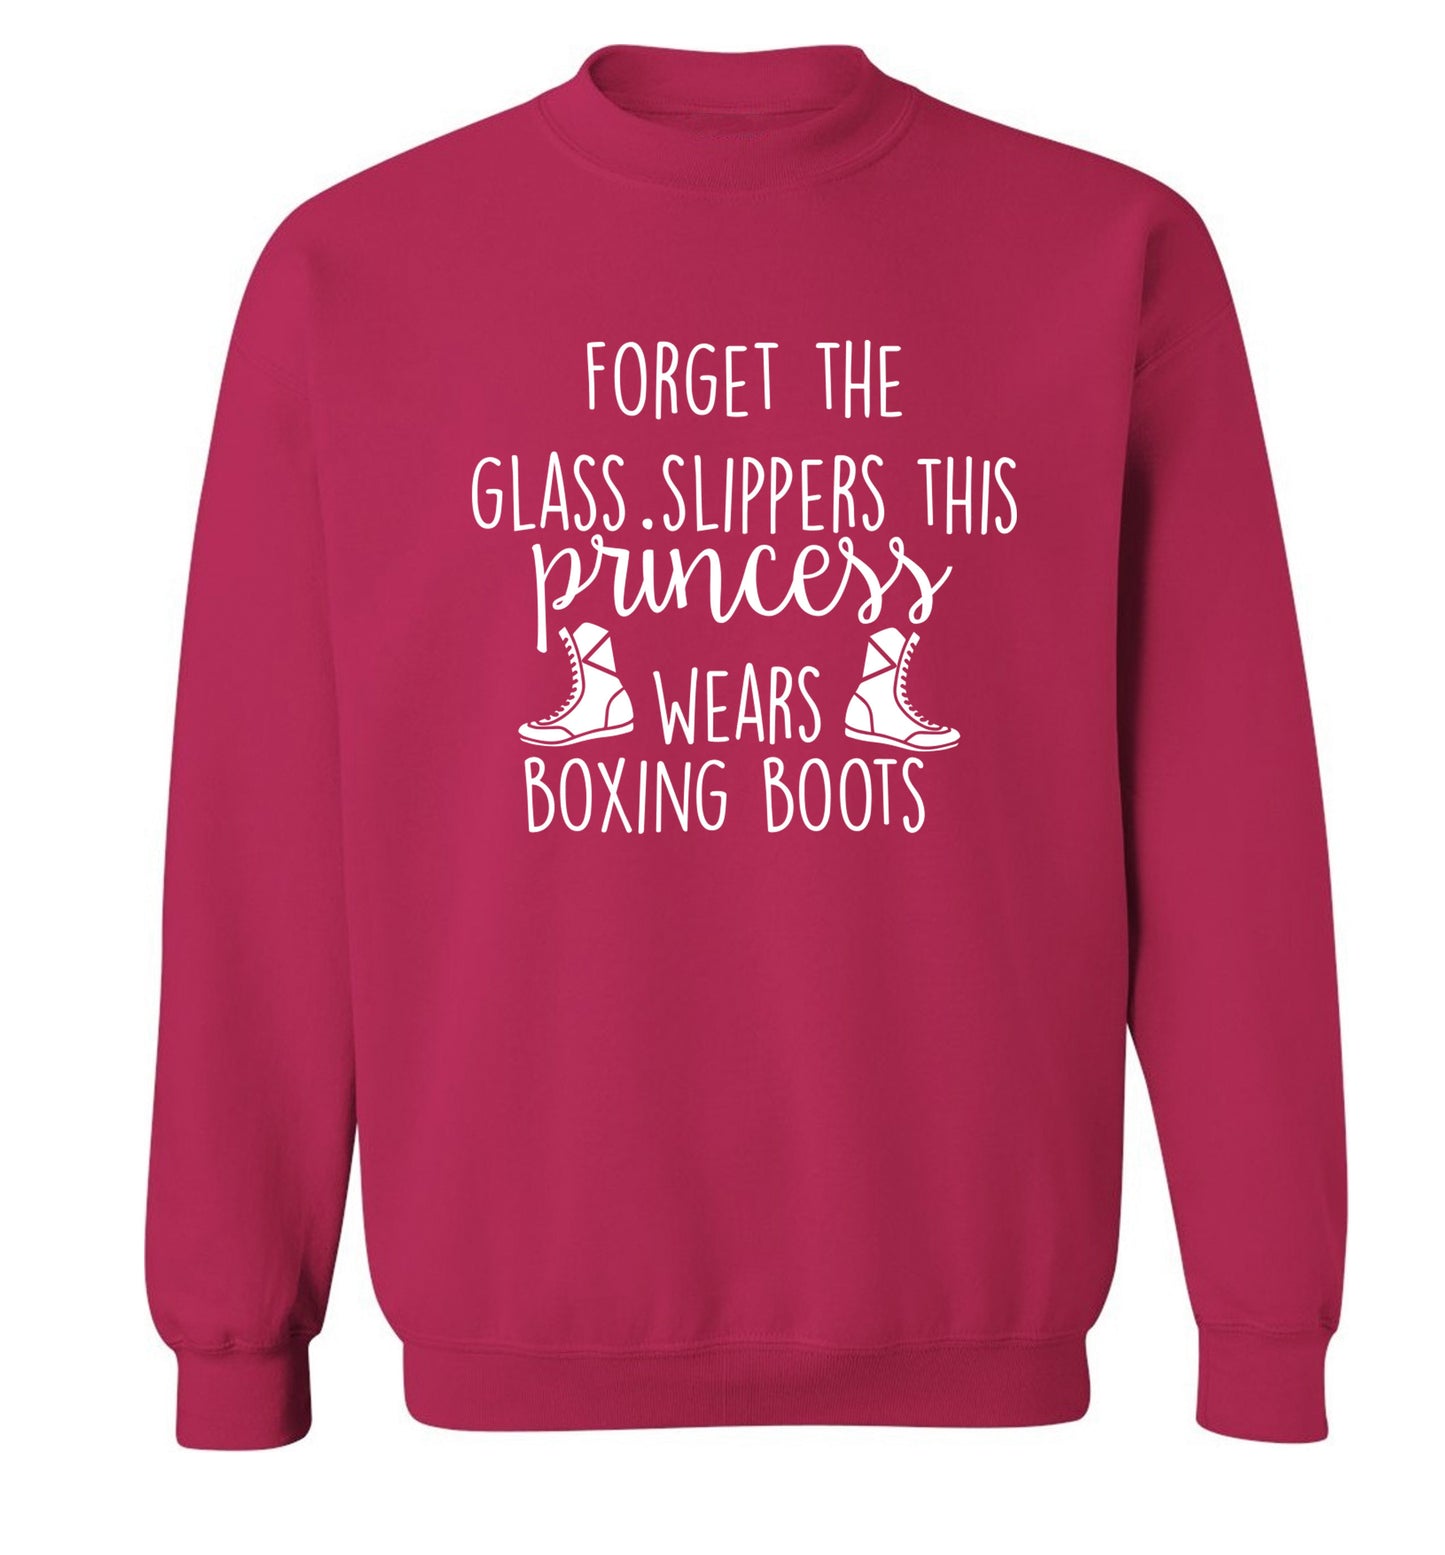 Forget the glass slippers this princess wears boxing boots Adult's unisex pink Sweater 2XL